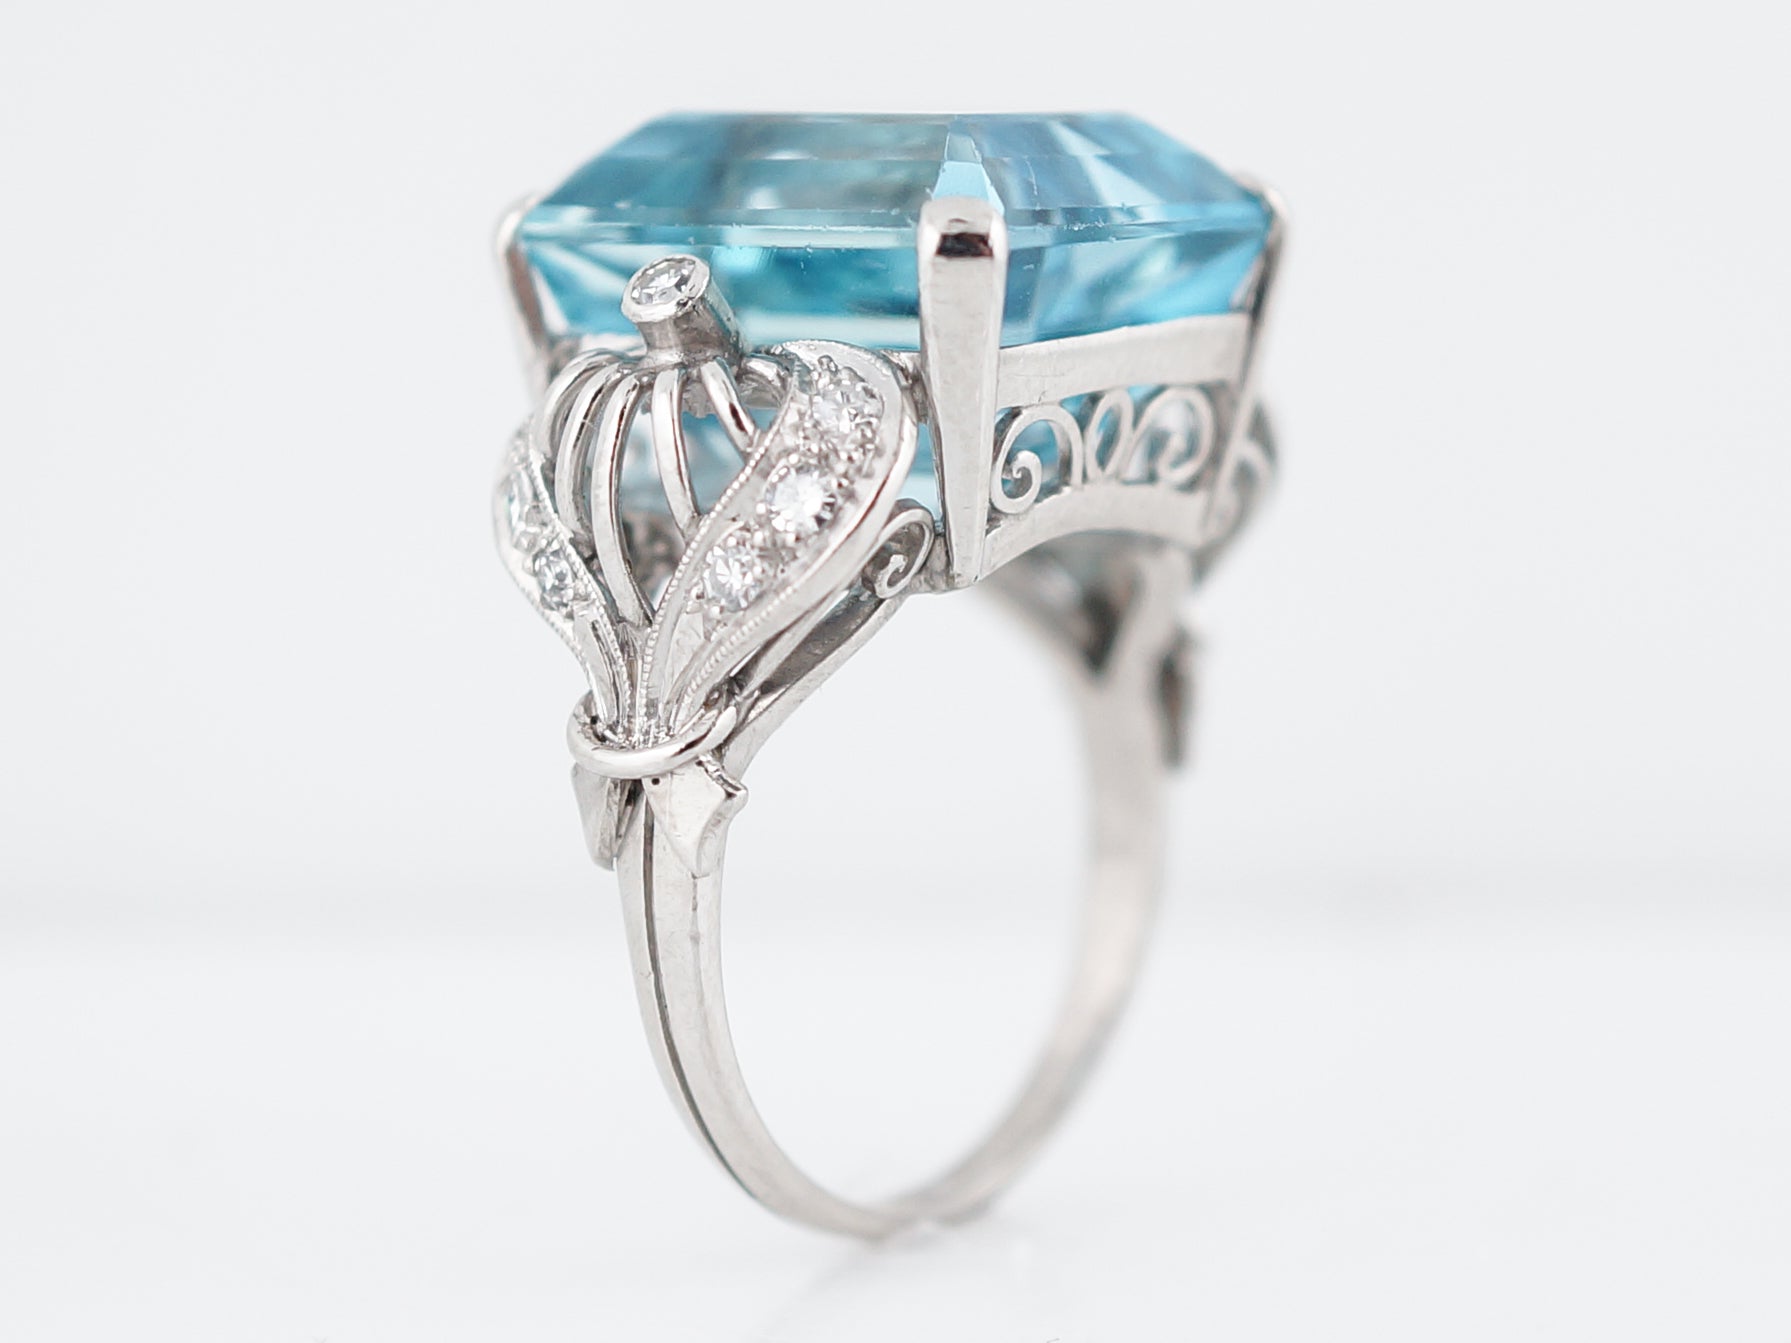 Antique Right Hand Ring Art Deco 12.40 Emerald Cut Aquamarine & .12 Single Cut Diamonds in PlatinumComposition: PlatinumRing Size: 6Total Diamond Weight: .12 cttw ctTotal Gram Weight: 8.60 rams g